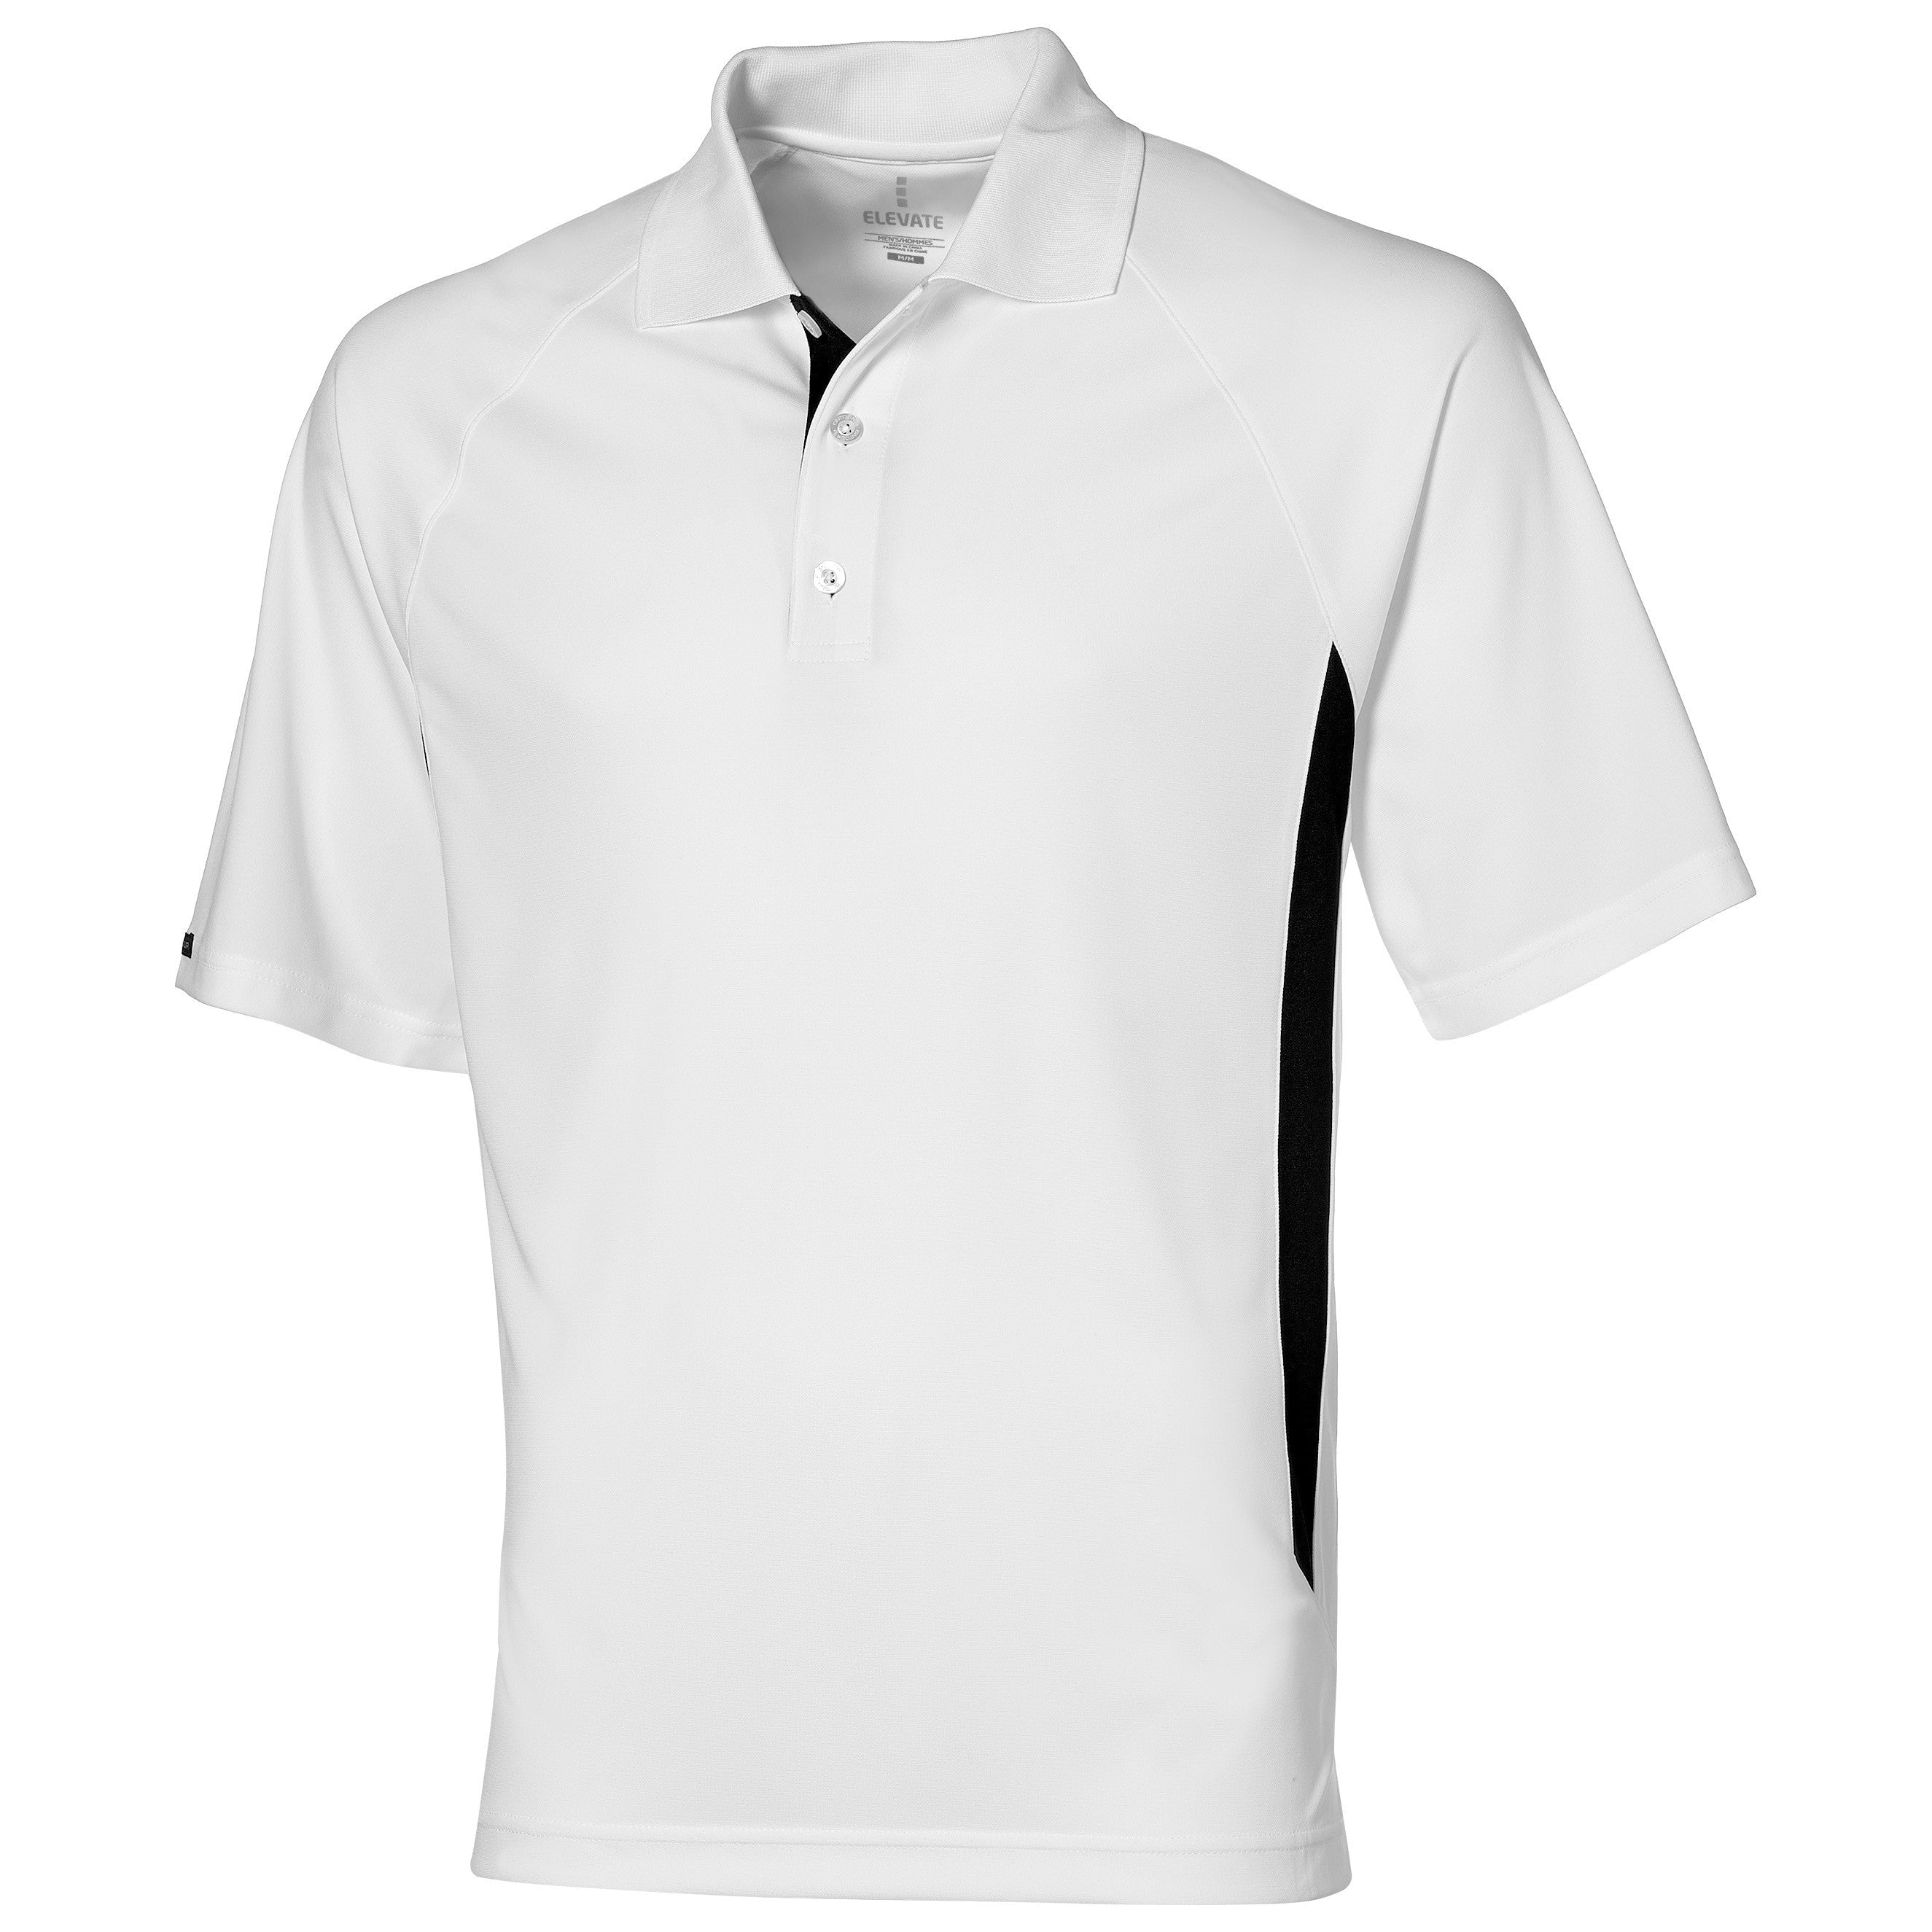 Mens Mitica Golf Shirt - Lime Only-2XL-White-W